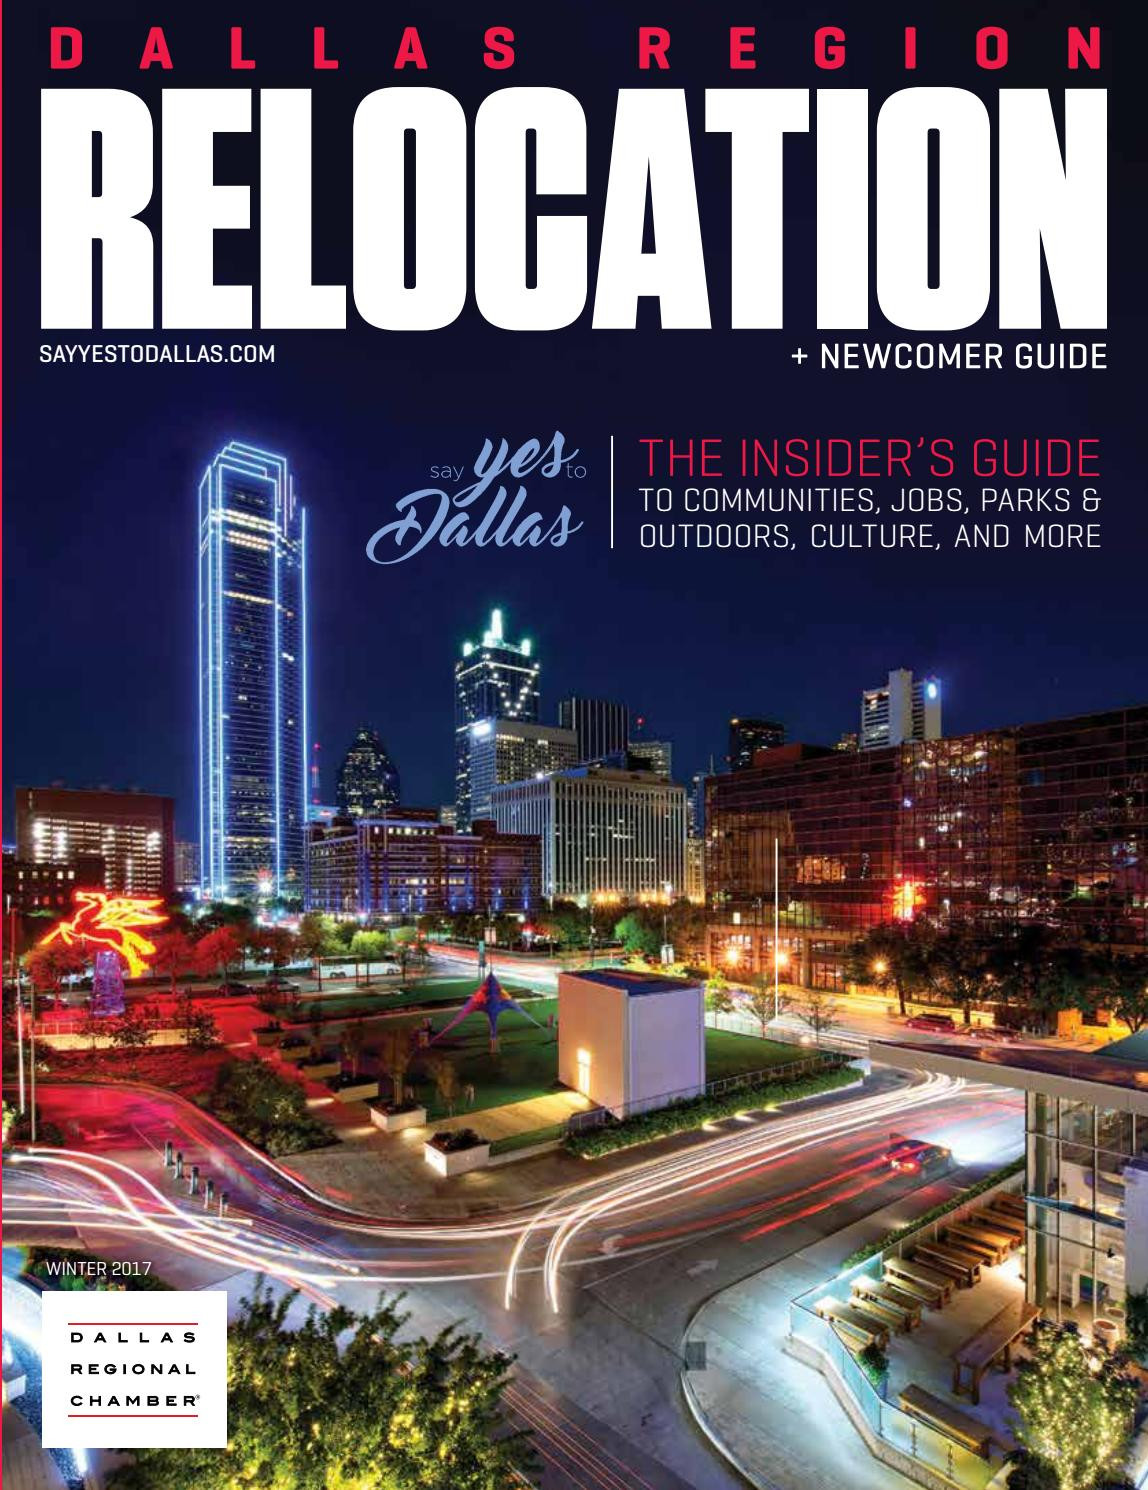 10 Fabulous Pc Hardwood Floors Hillburn Ny 2024 free download pc hardwood floors hillburn ny of dallas region relocation newcomer guide winter 2017 by dallas with regard to dallas region relocation newcomer guide winter 2017 by dallas regional chamber 